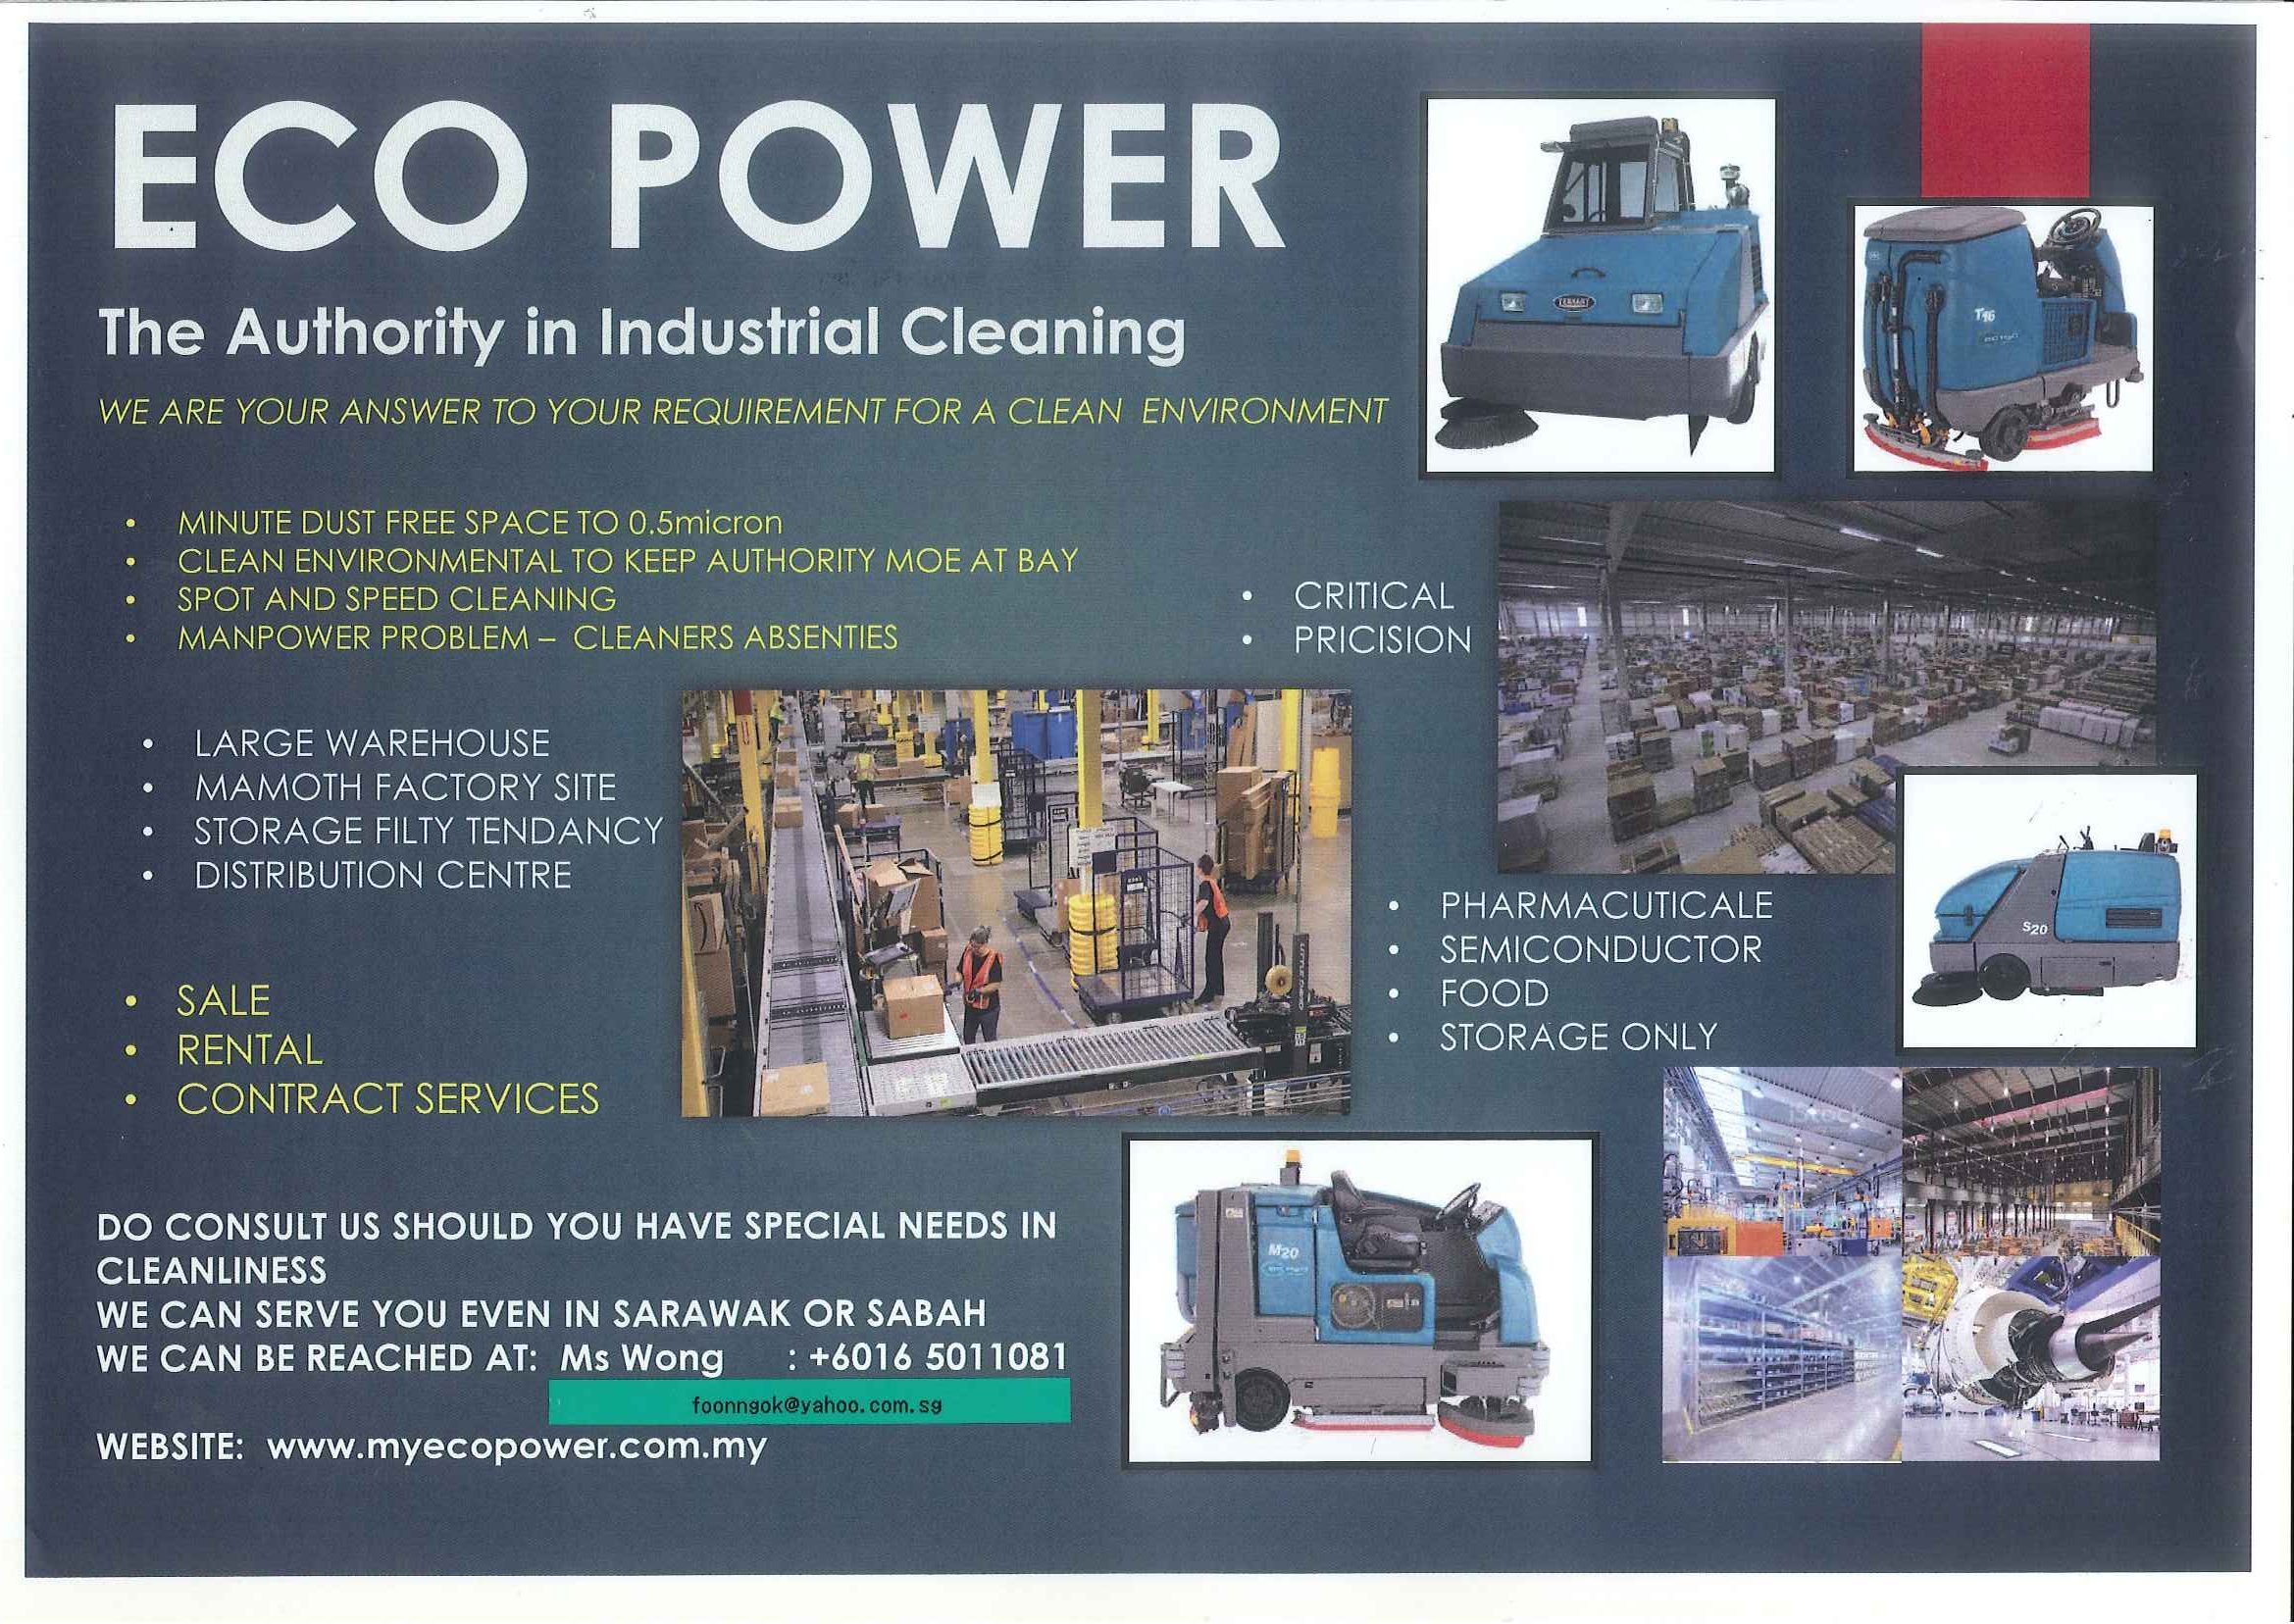 Eco Power Forklift Parts Supplies Sales Rent Repair Recondition Services Of New Used Forklifts Scrubbers Sweepers